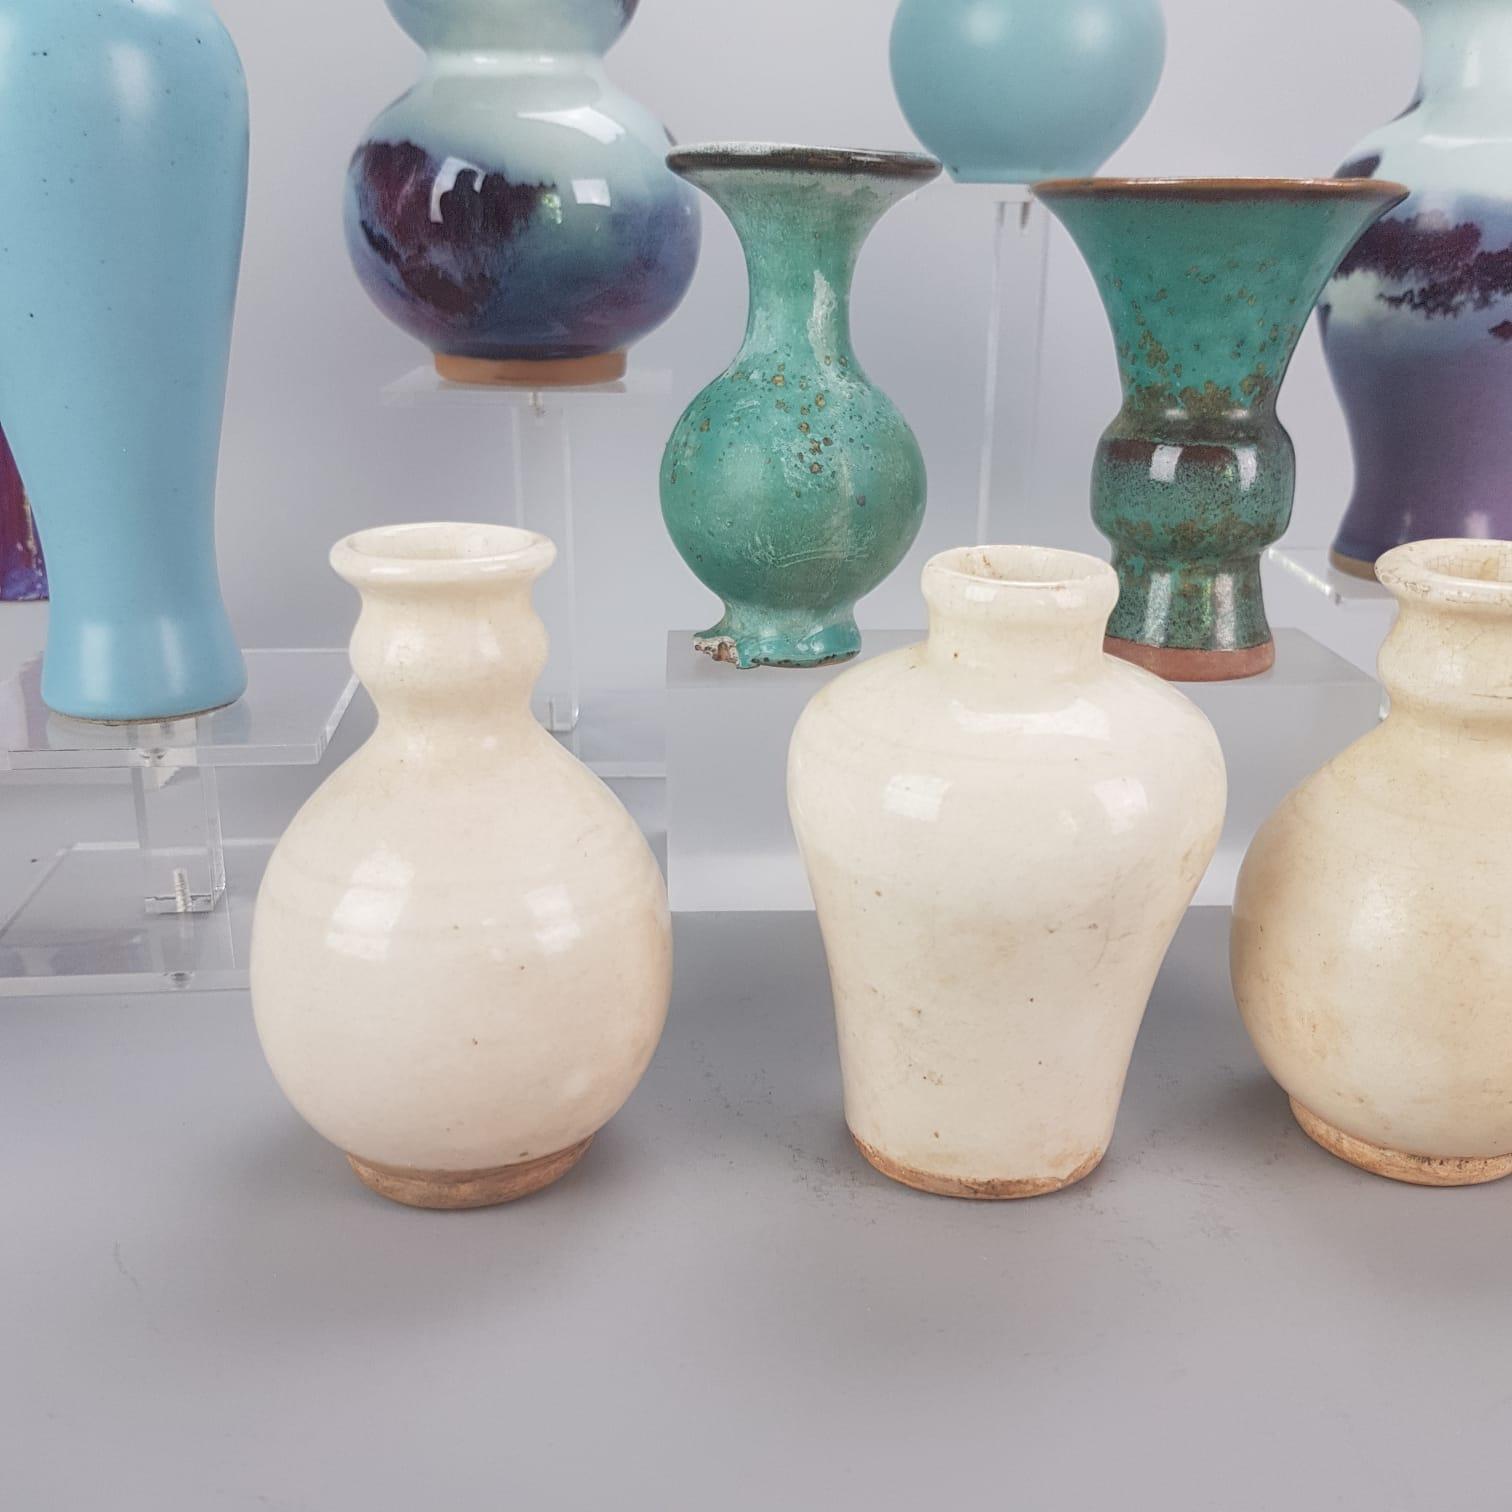 Lot of Chinese porcelain PRoC Vases Monochromes and unusual Glazed In Excellent Condition For Sale In Amsterdam, Noord Holland